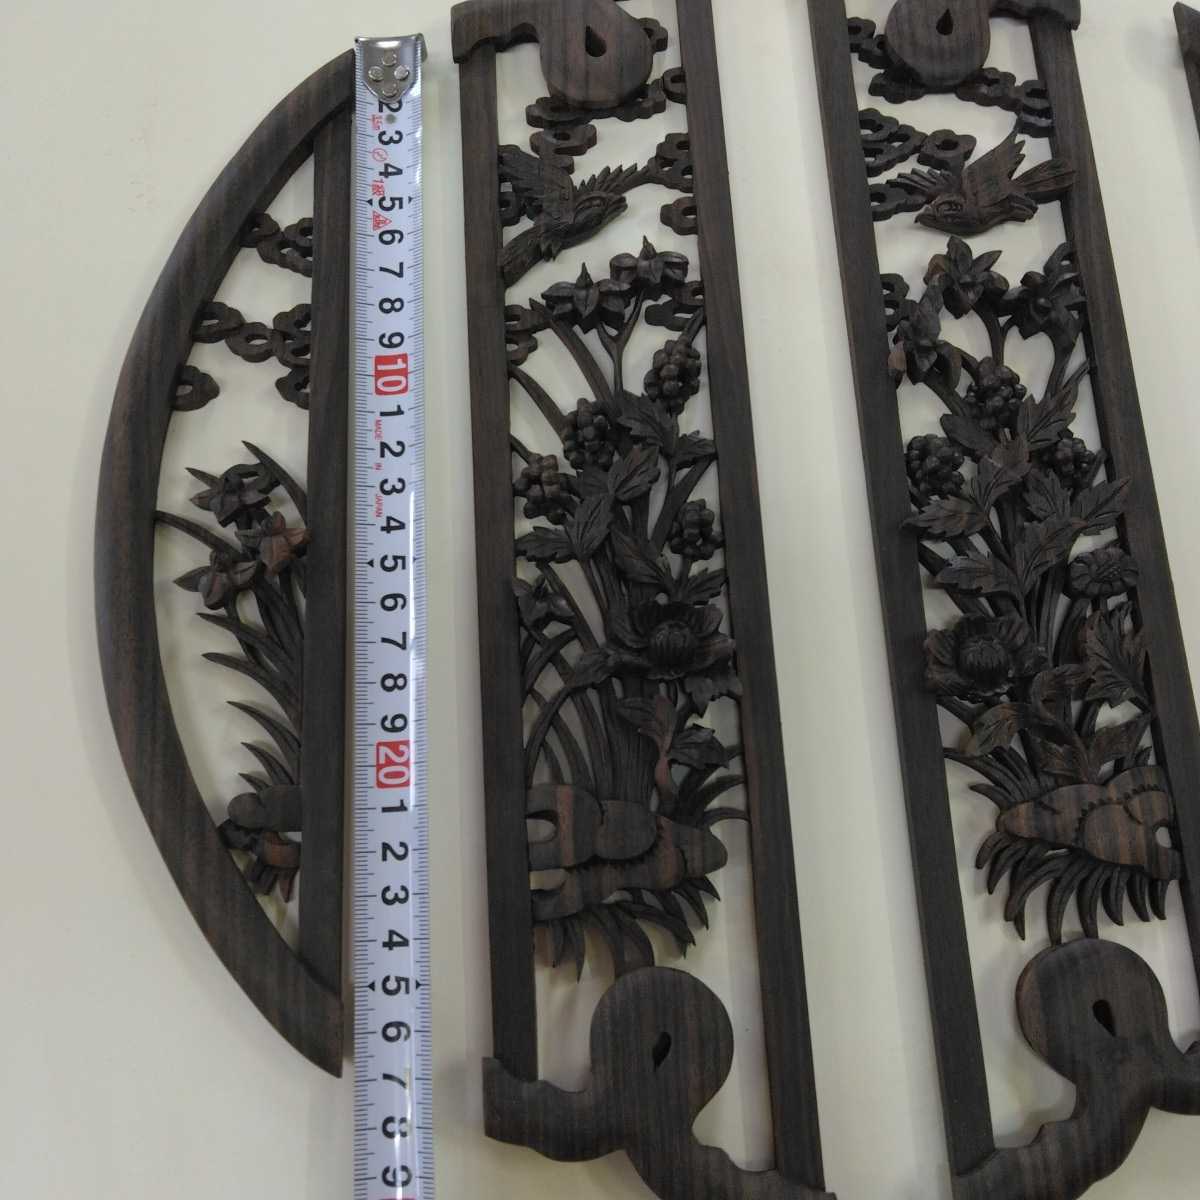 [ postage included ] ebony ... carving decoration board 4 pieces set control number (1207) dead stock wooden sculpture cloth finish 